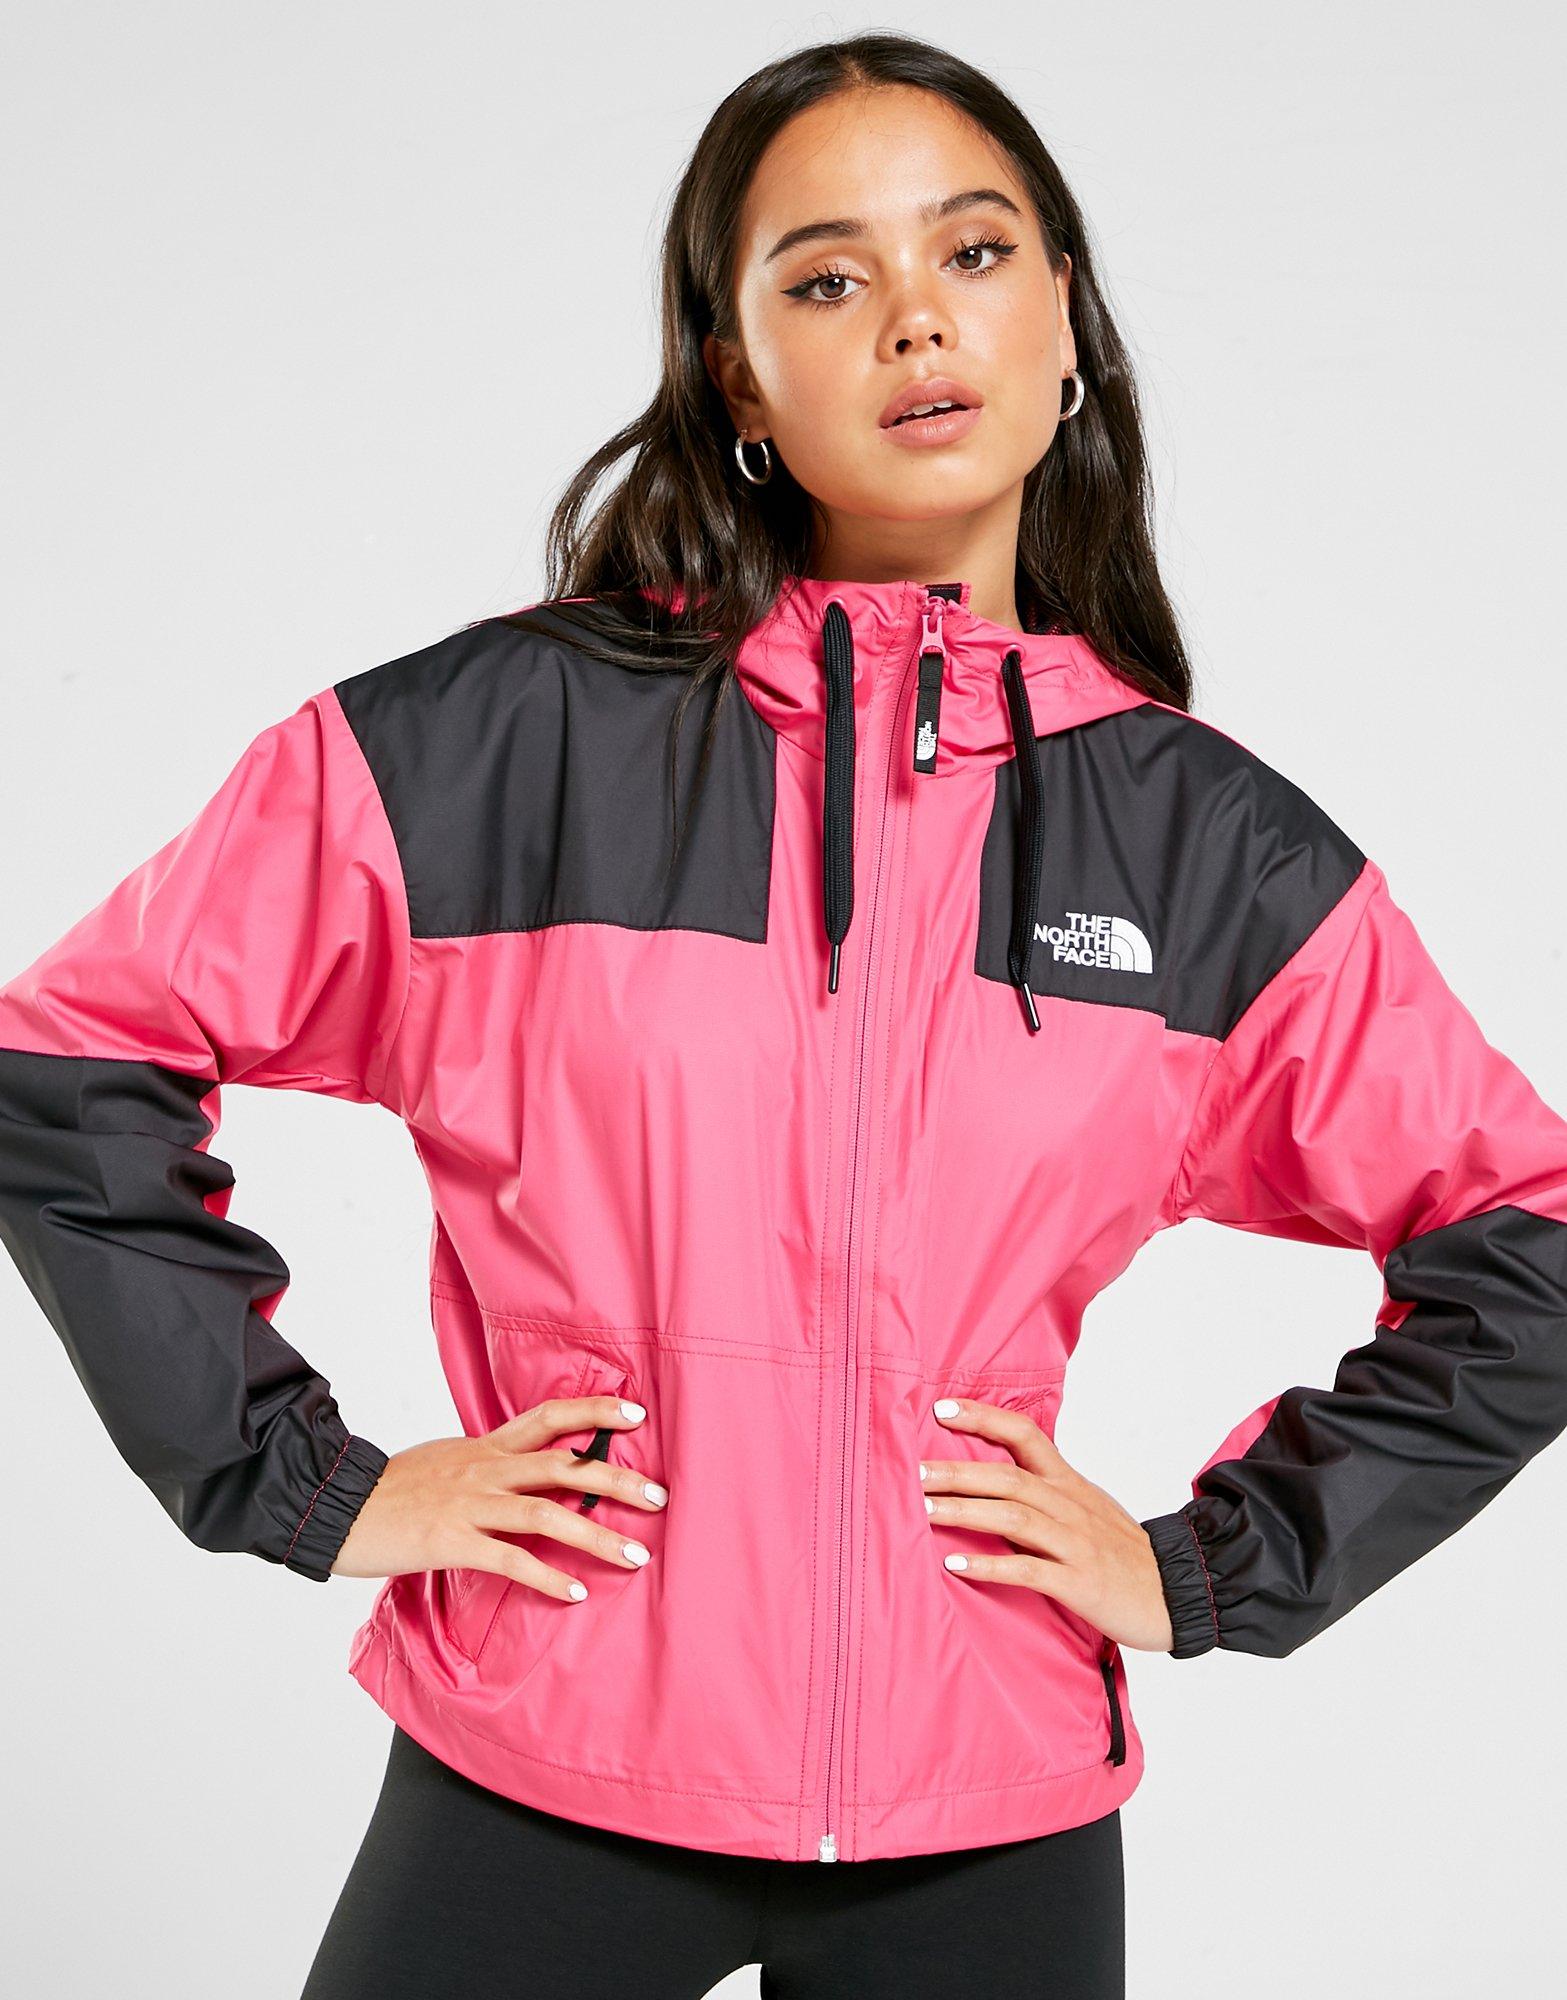 The North Face Packable Panel Wind Jacket Women's